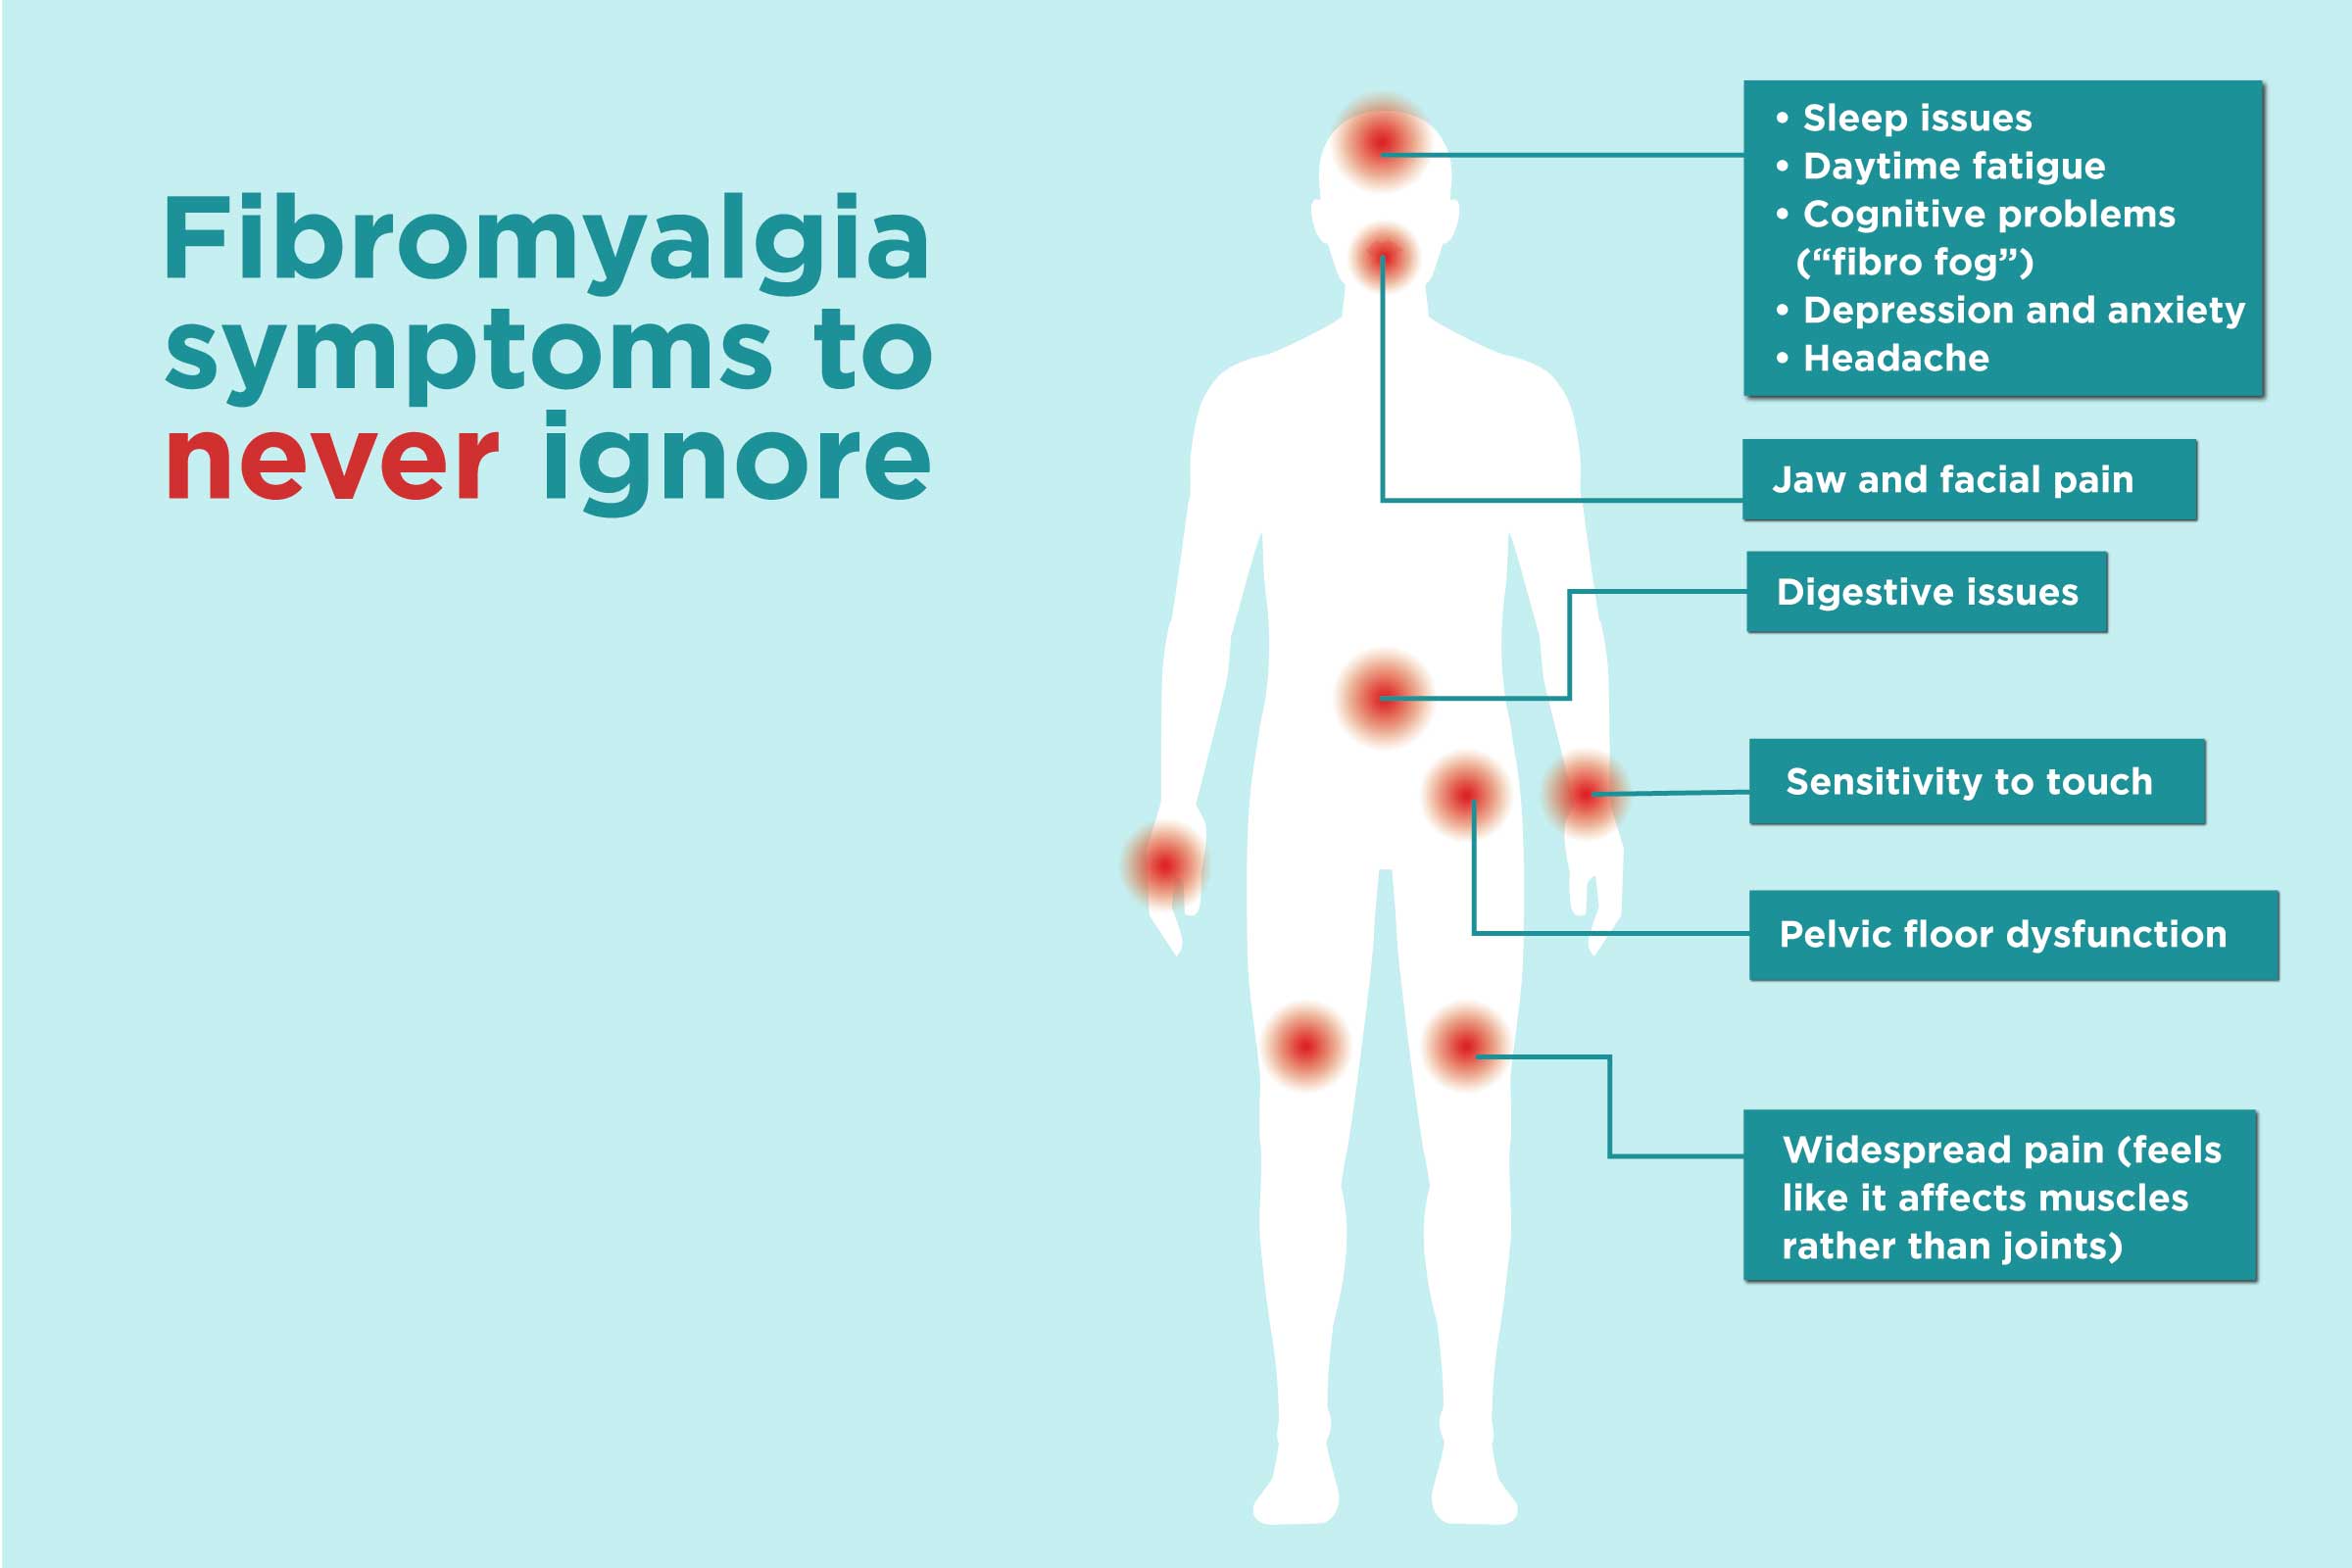 TENS Reduced Fibromyalgia Pain and Fatigue in Women